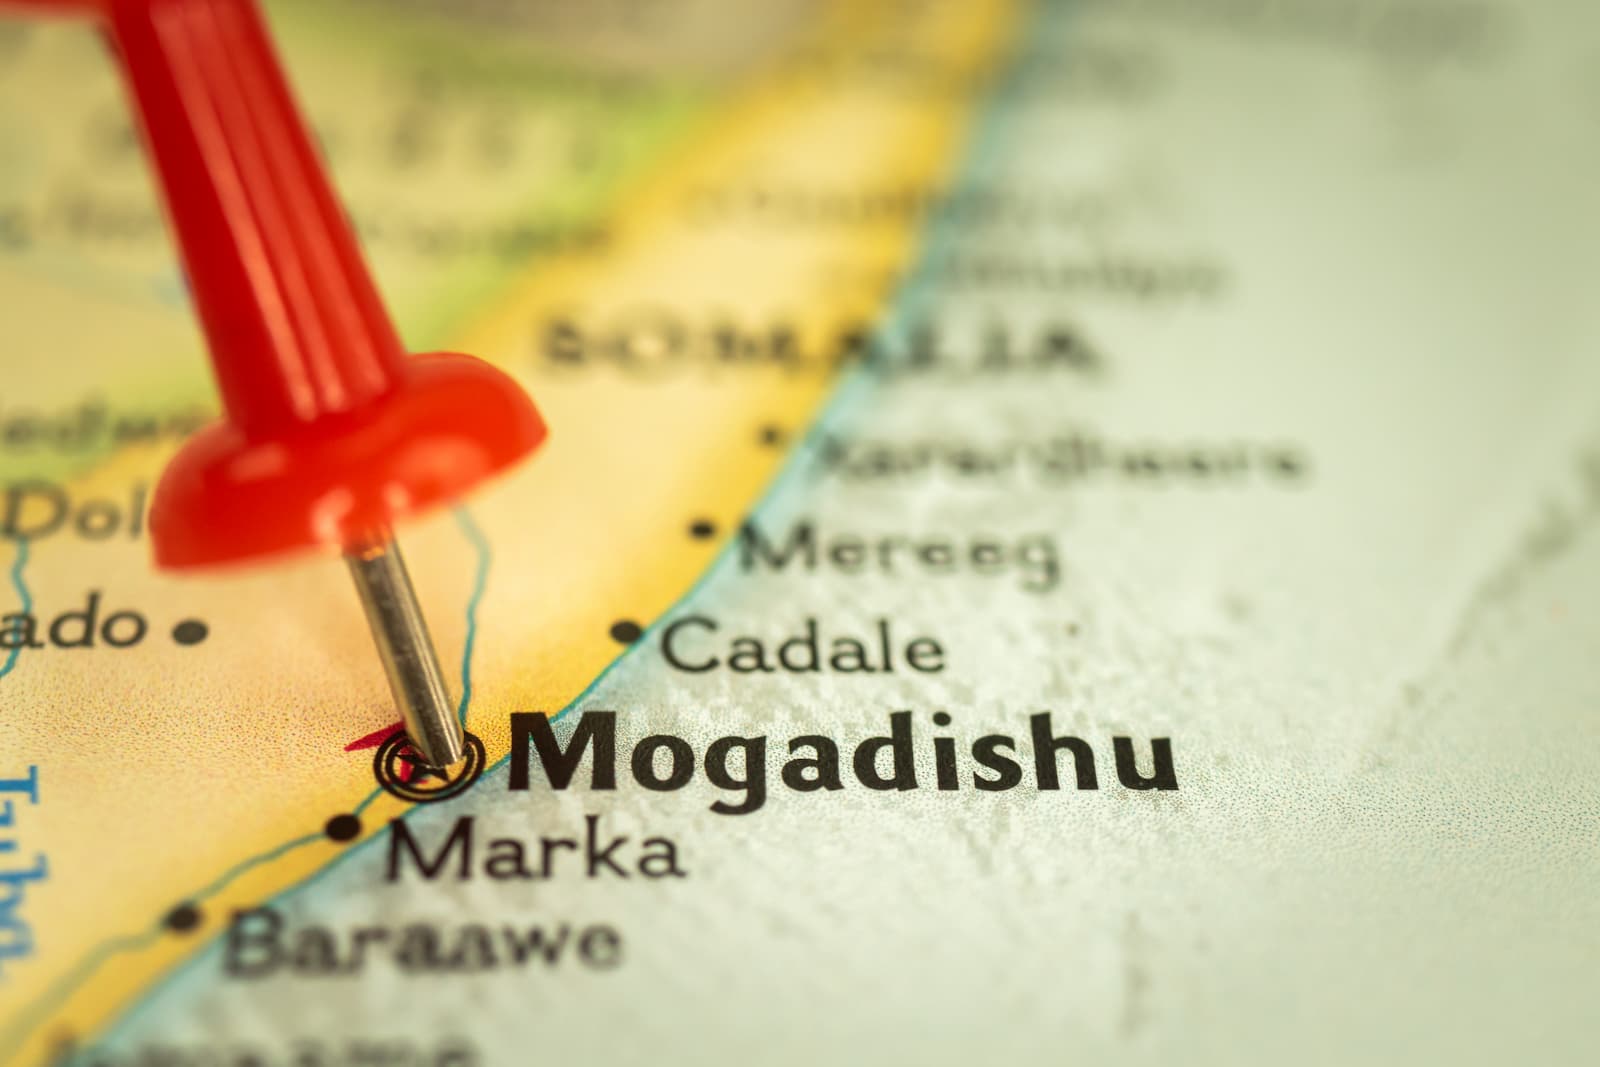 Where is the most dangerous place to live on earth? Anyone for a 6-day tour of Mogadishu?